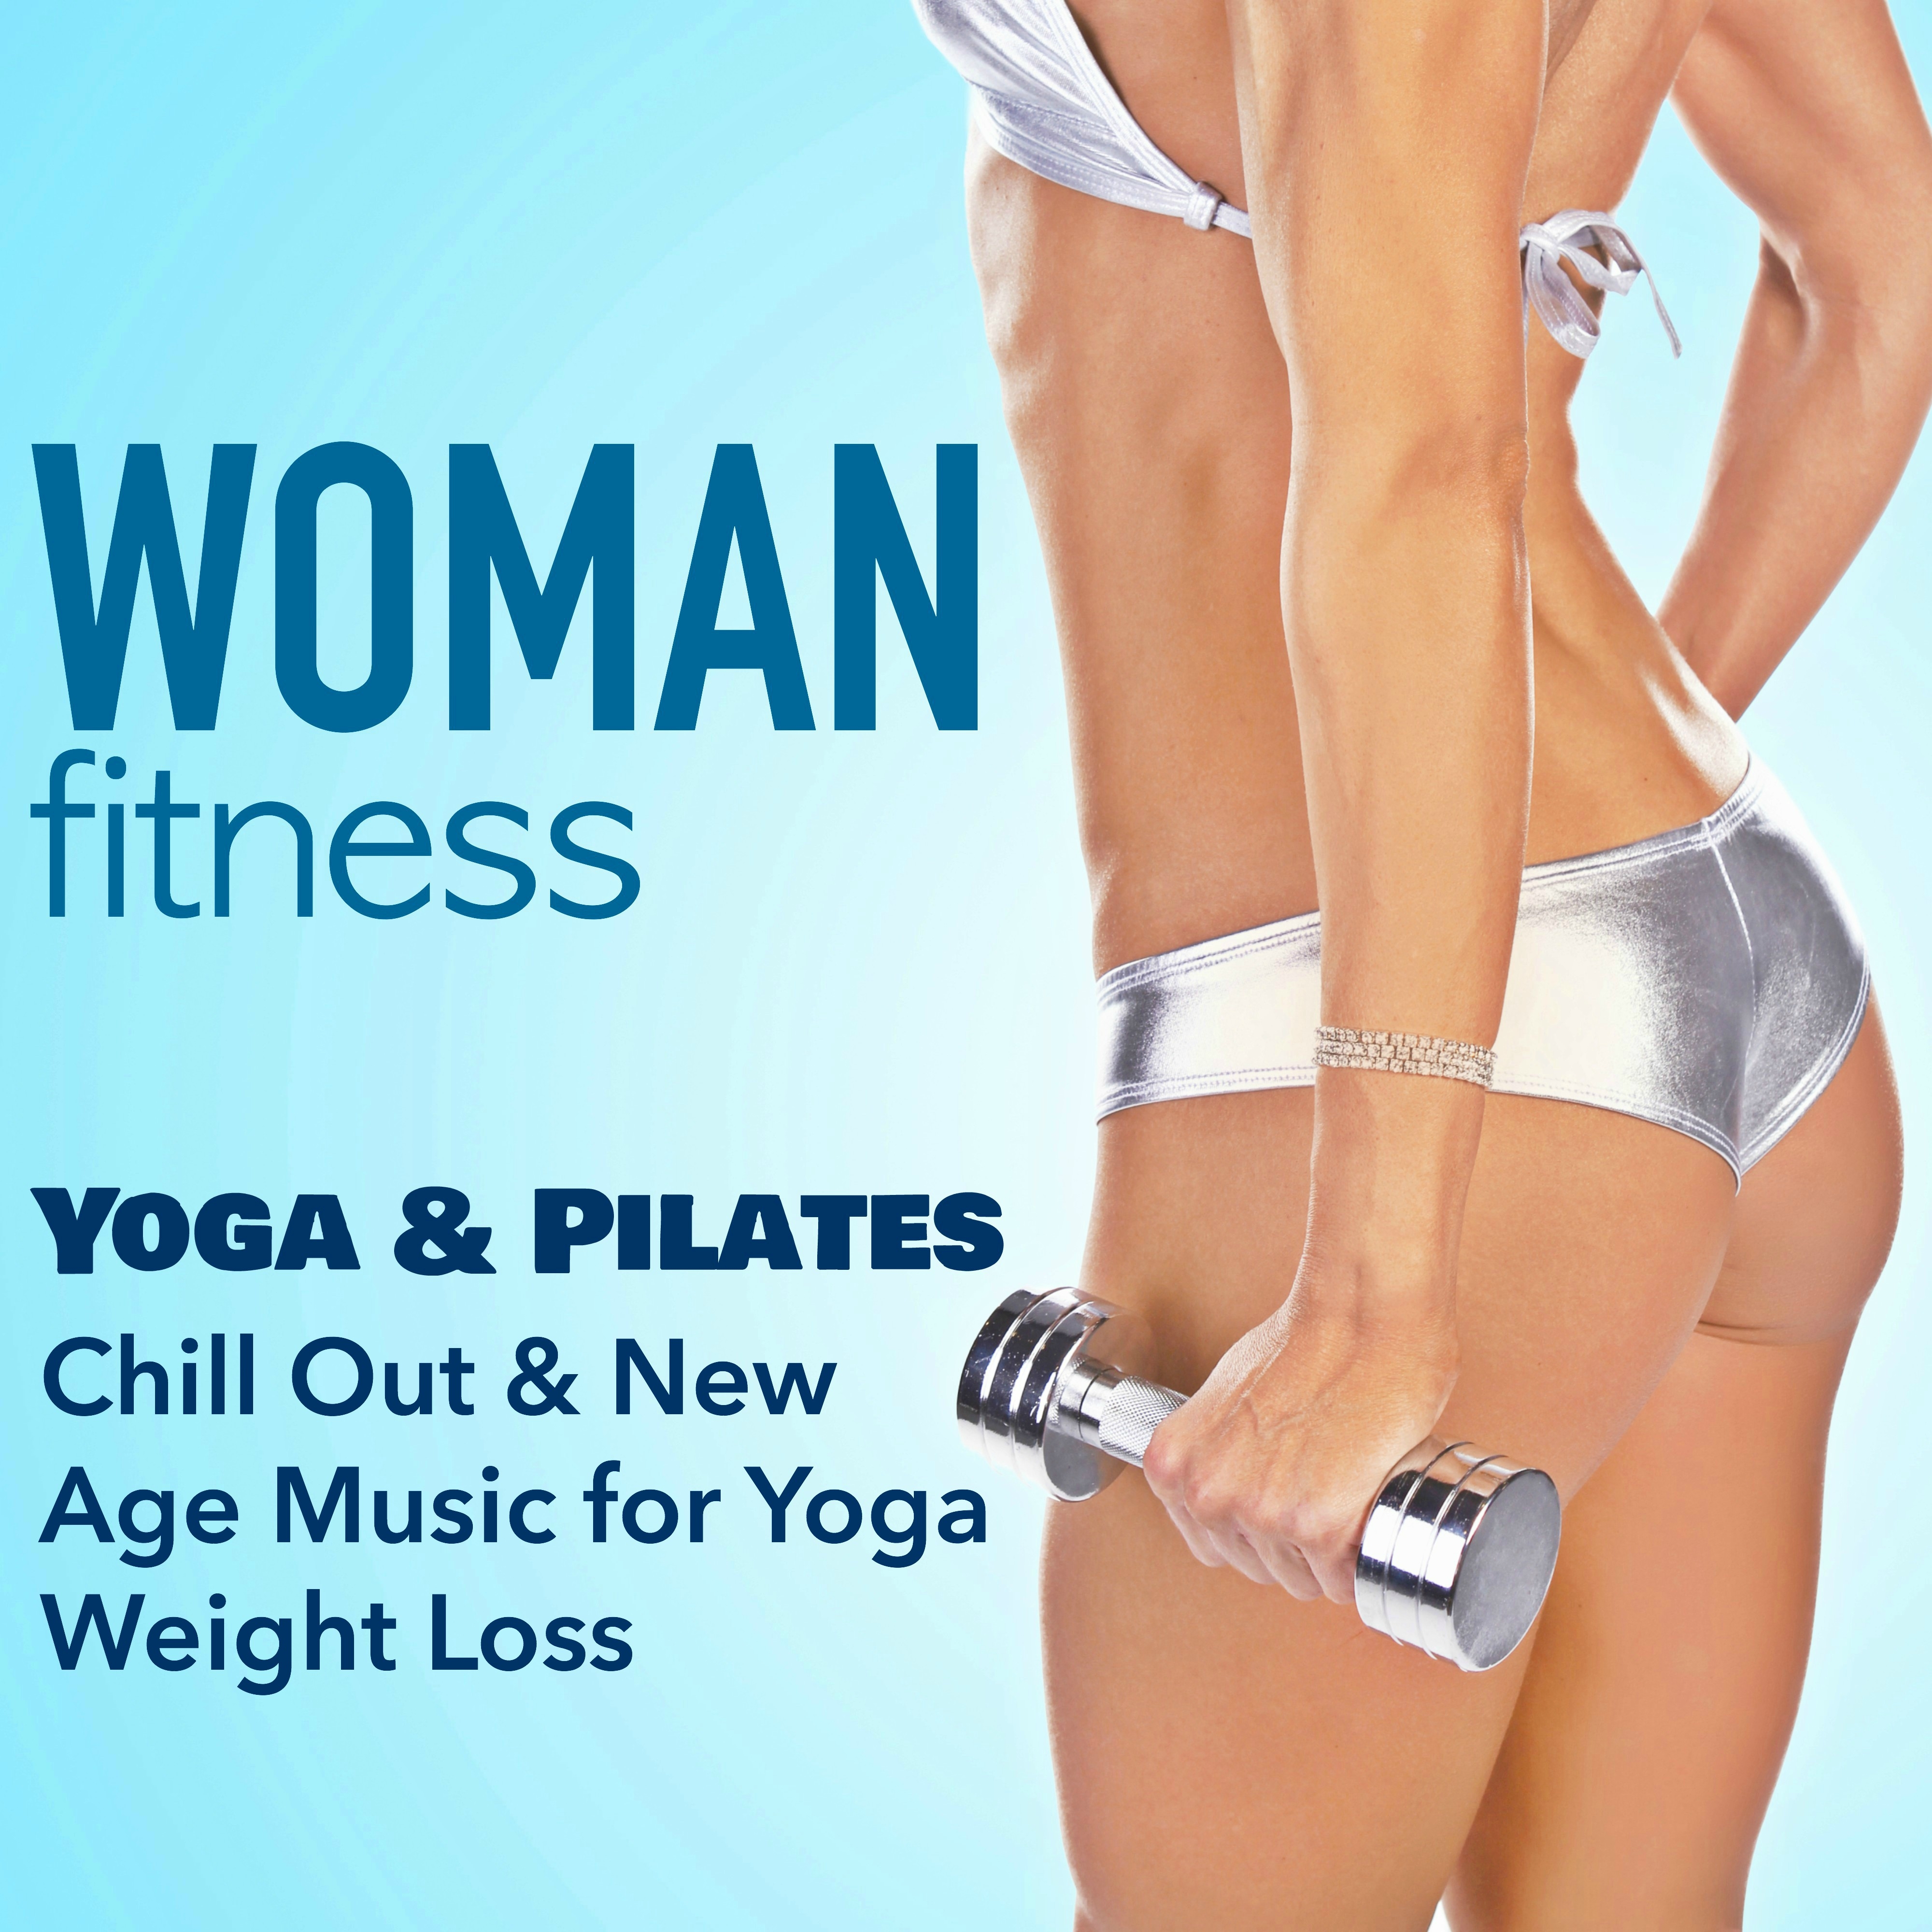 Woman Fitness - Yoga & Pilates: Chill Out & New Age Music for Yoga Weight Loss & Fitness Training for **** Body